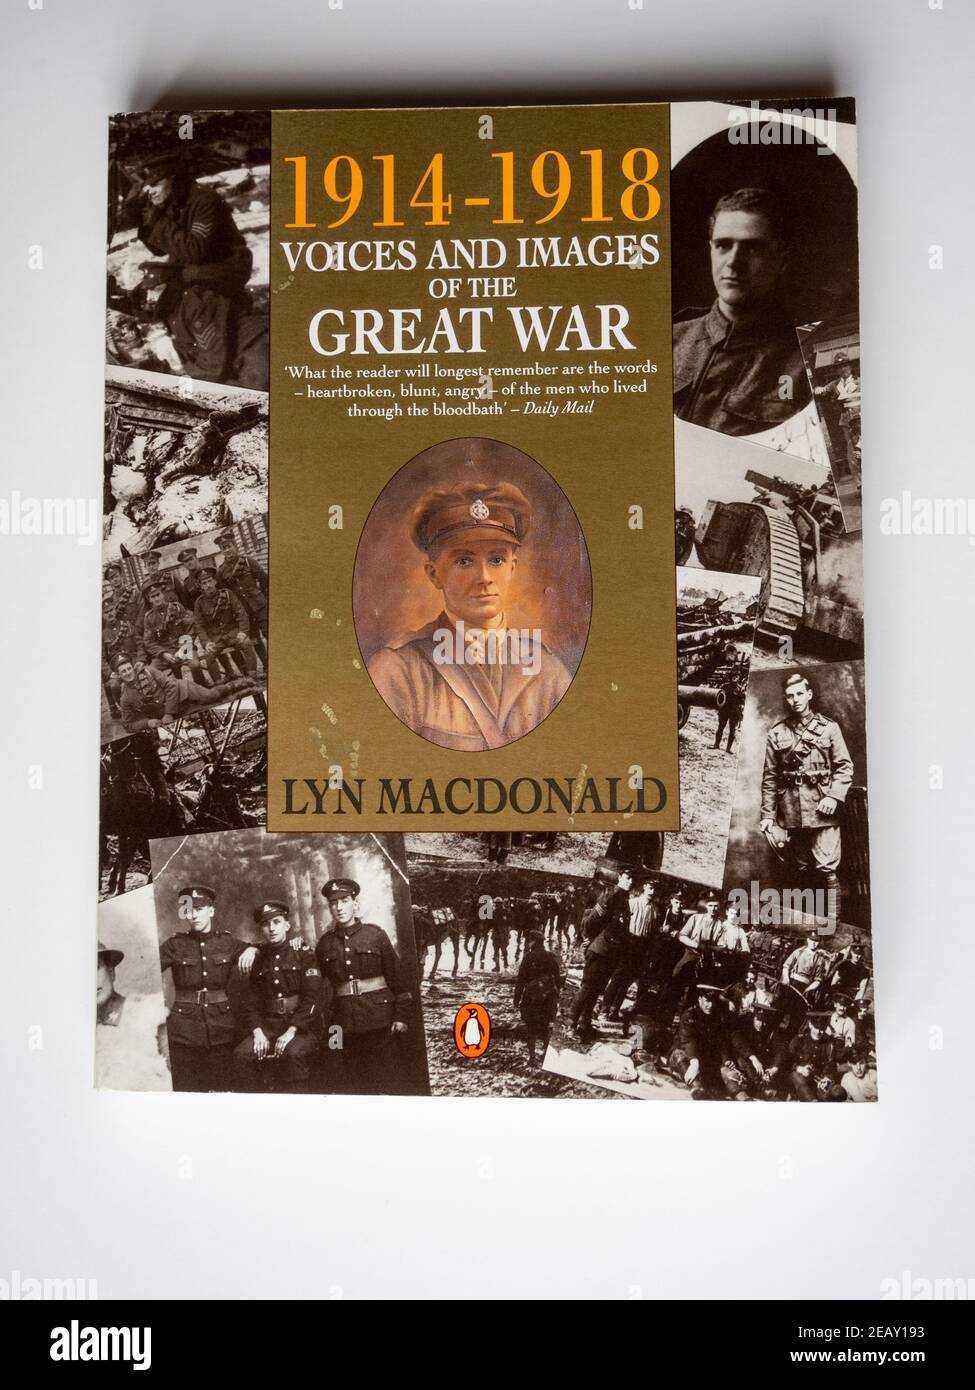 Stock photo of the book 1914-1918 Voices And Images Of The Great War, by the author and historian Lyn Macdonald; Penguin Books, 1991 Stock Photo